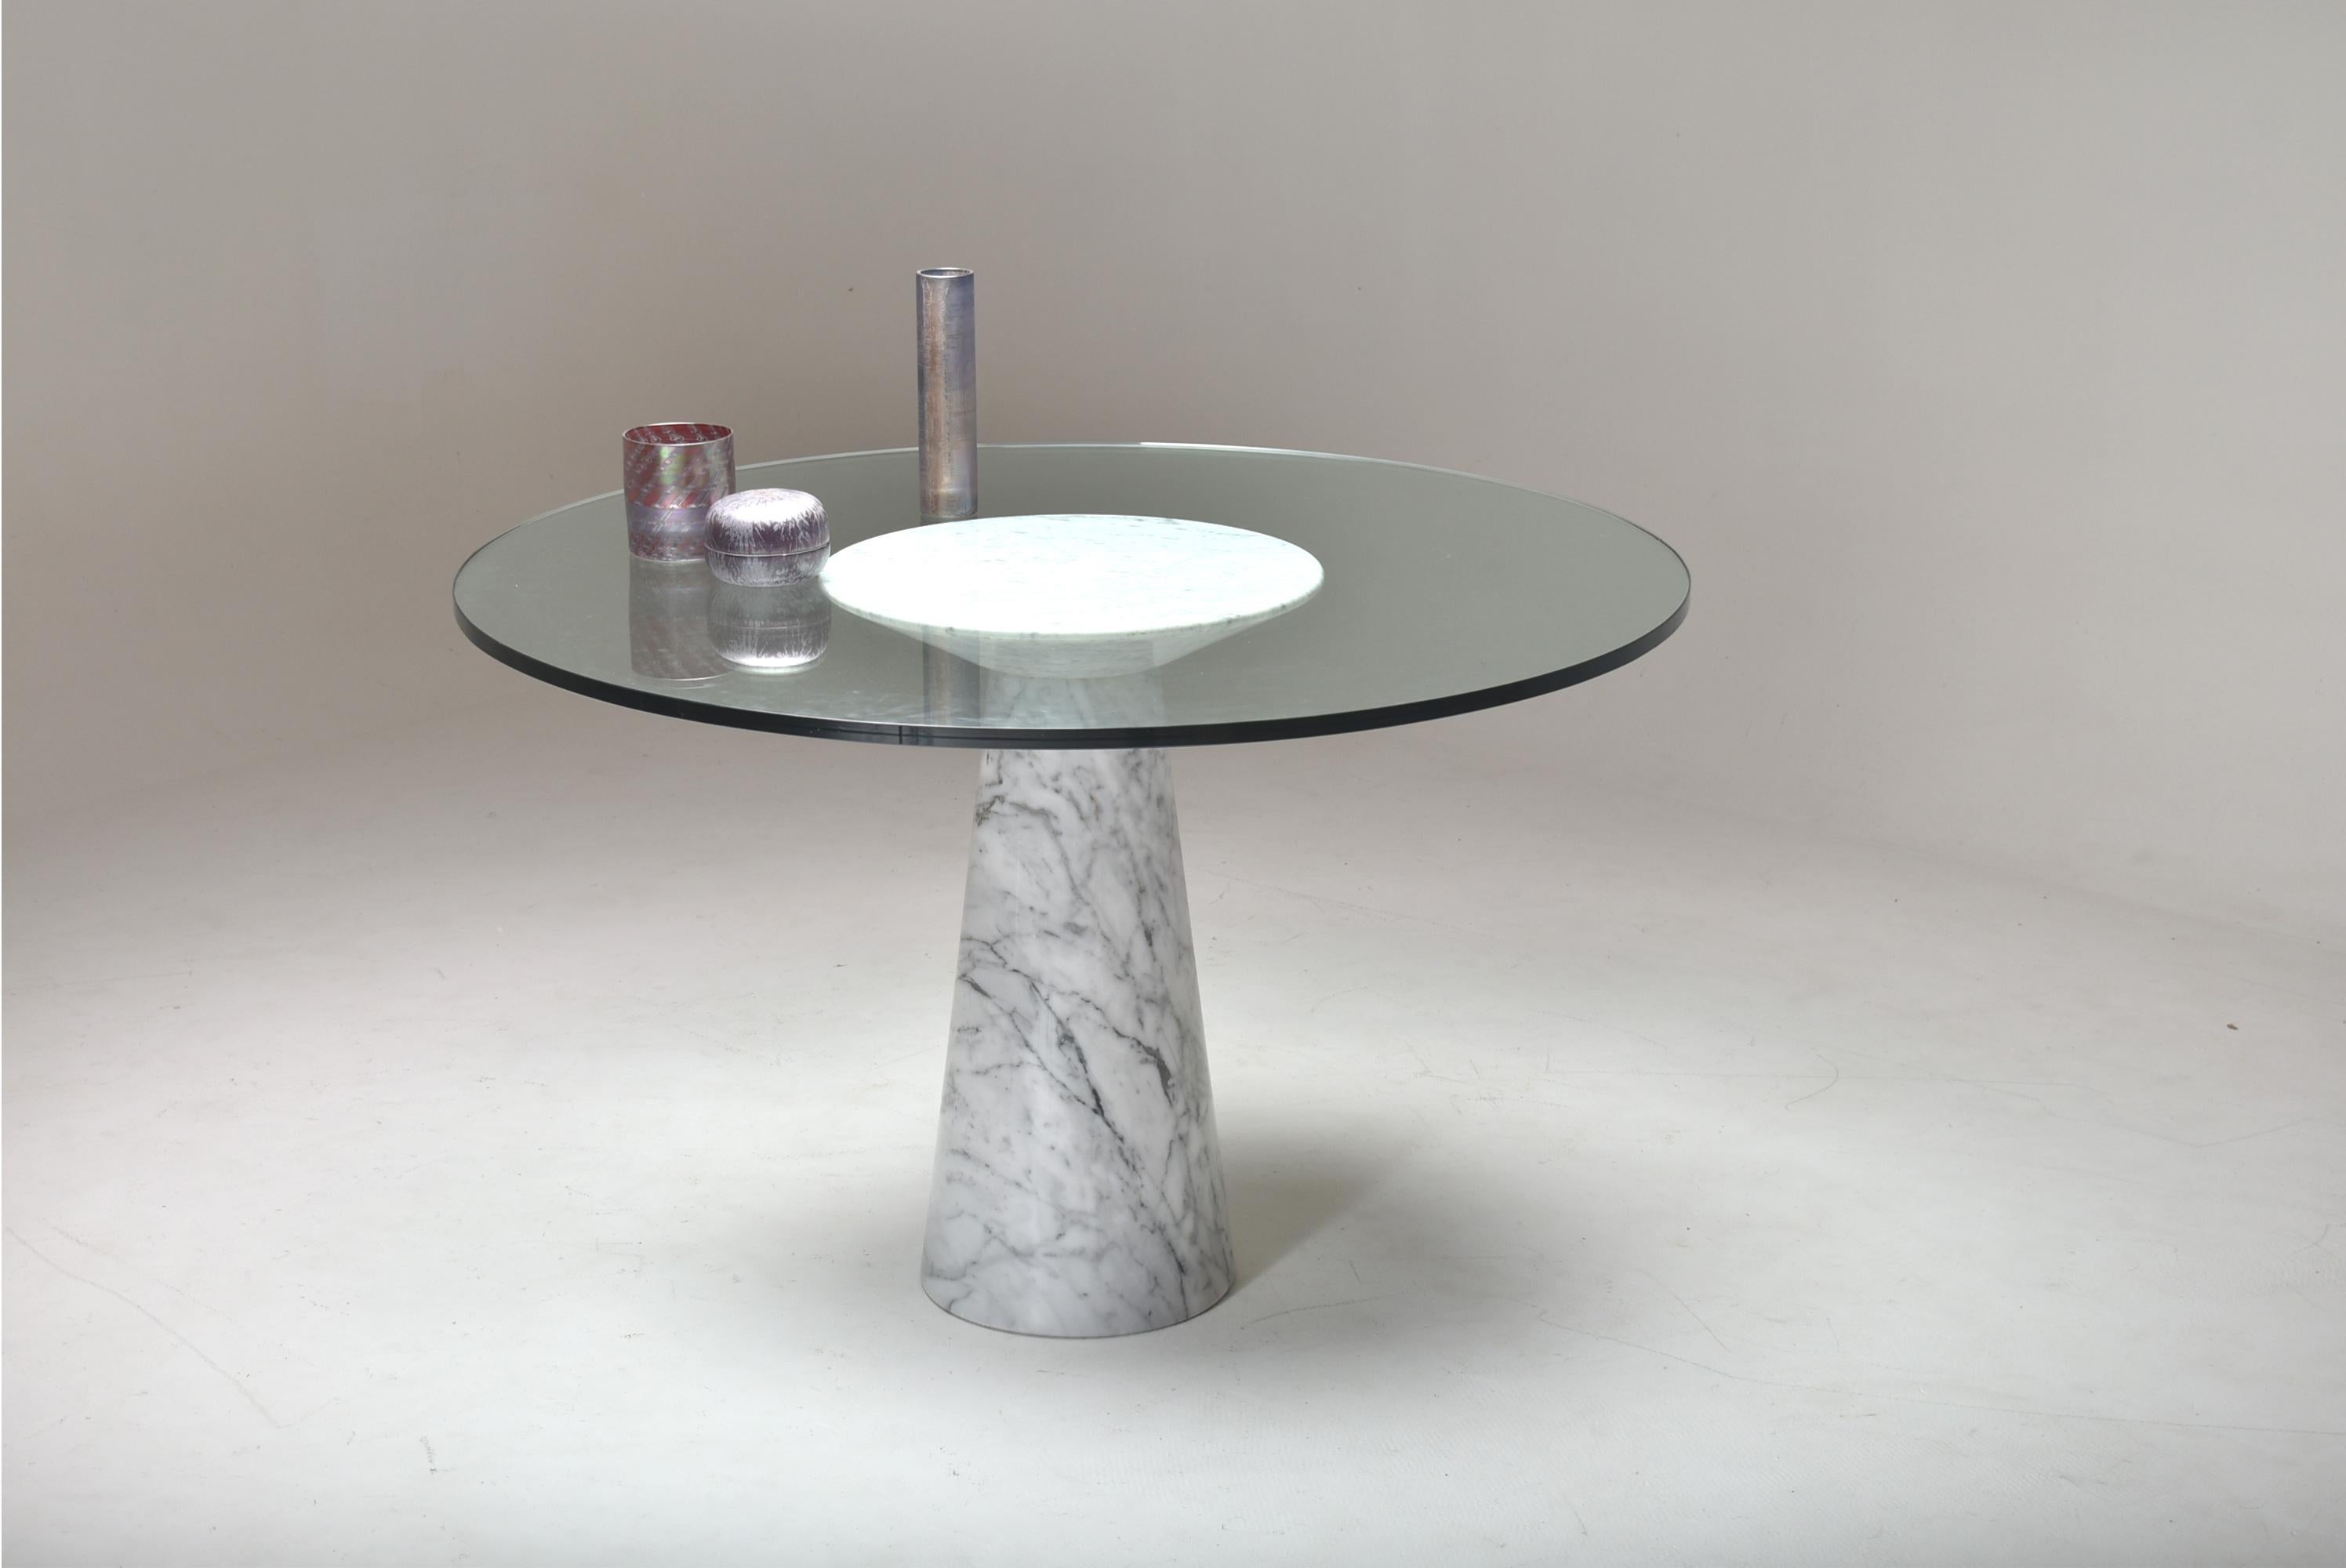 Mid-Century Modern Angelo Mangiarotti Round Pedestal Dining Table, Marble and Glass, Italy, 1970 For Sale